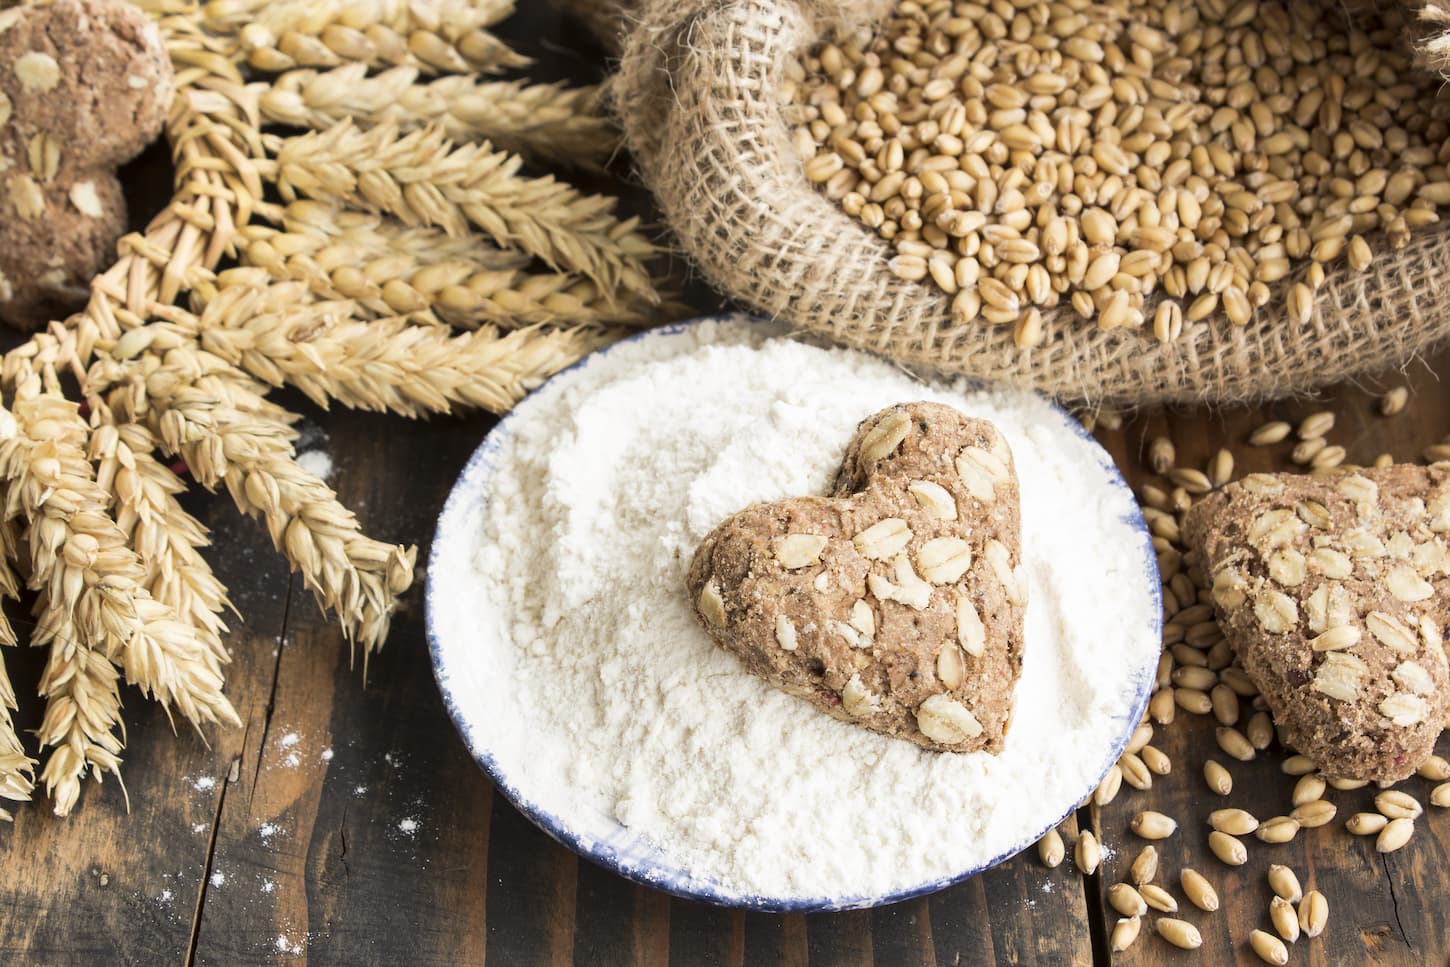 An image of wheat and wheat products on a rustic wooden background.